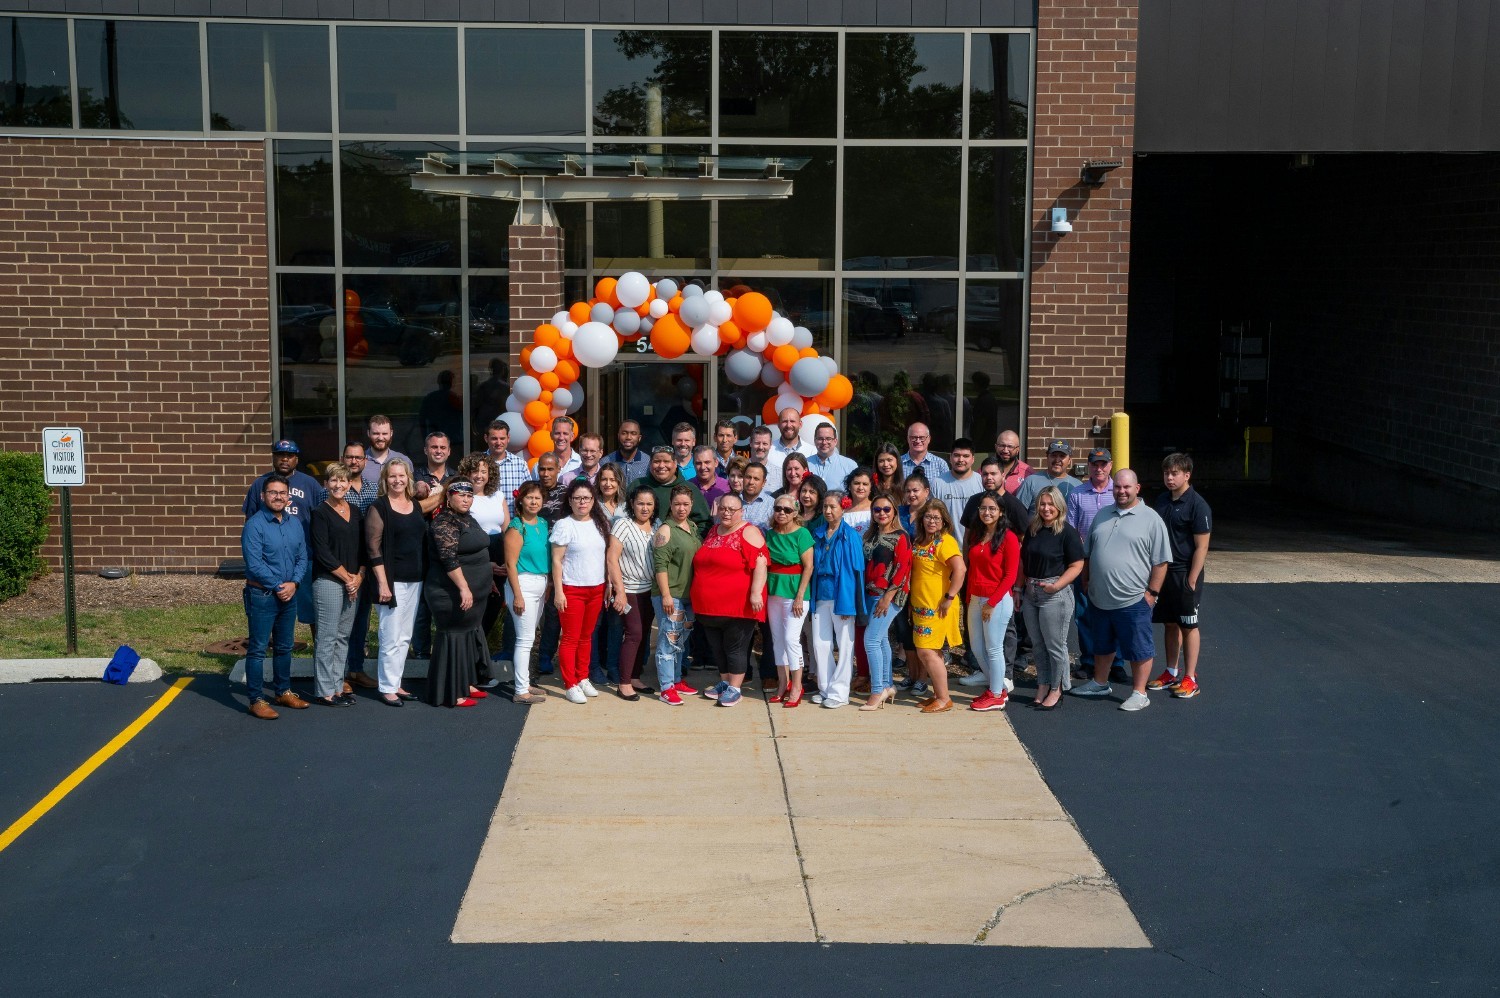 Chief employees celebrating the Grand Opening of our new expanded office space and warehouse.